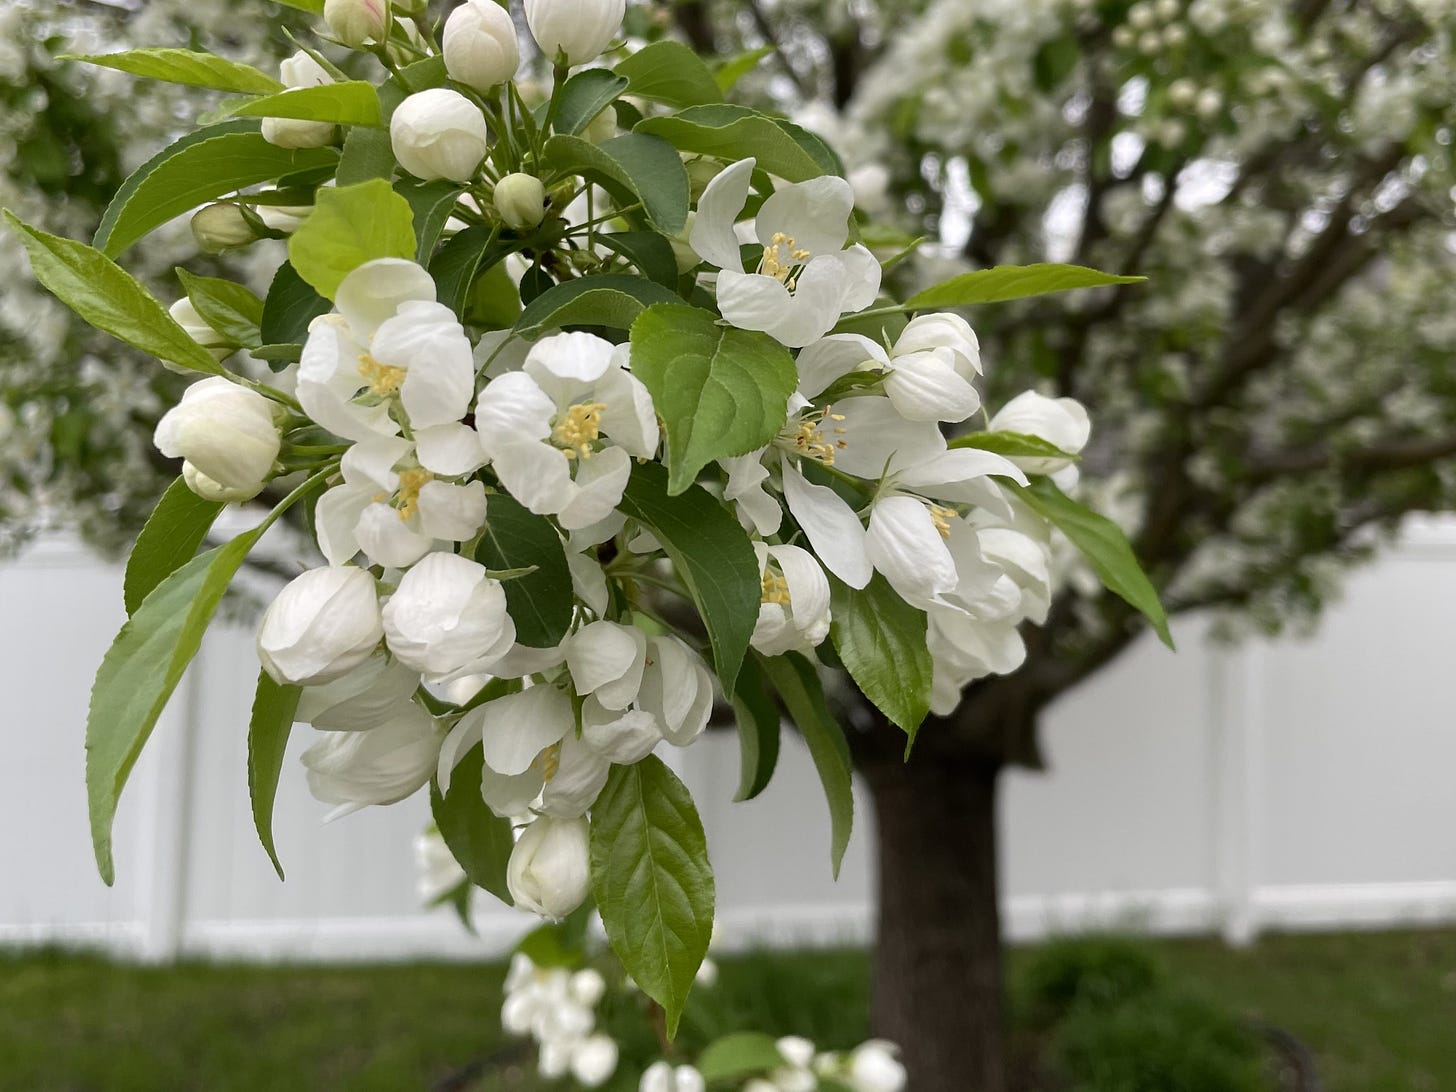 Closeup of blossoms on a flowering crabapple tree